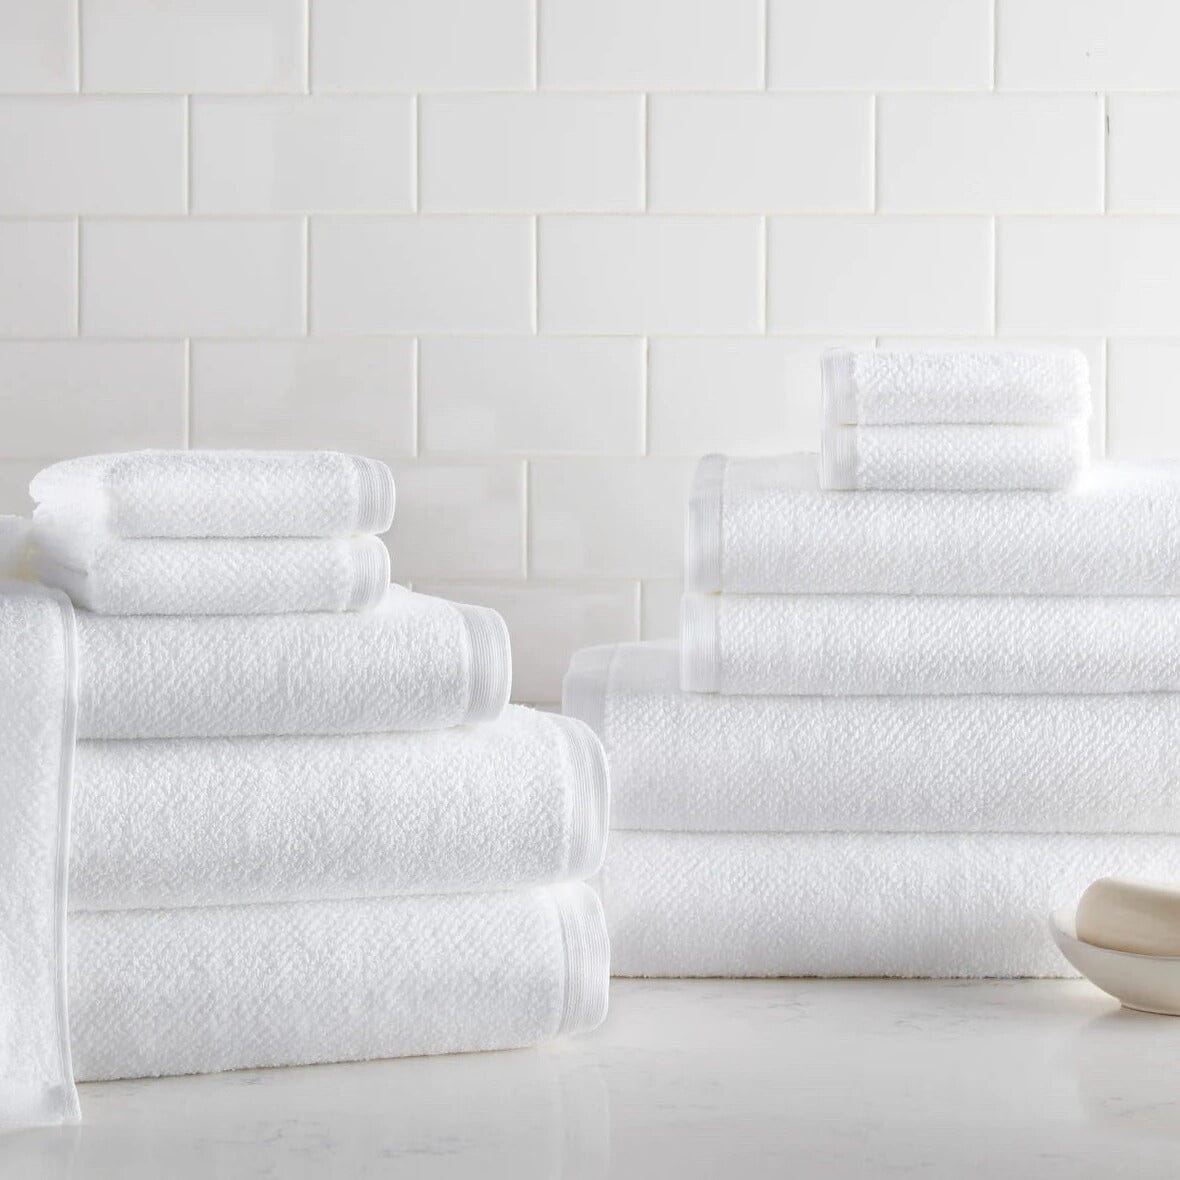 Peacock Alley Bath Towels | Jubilee Towels in White Cotton Terry